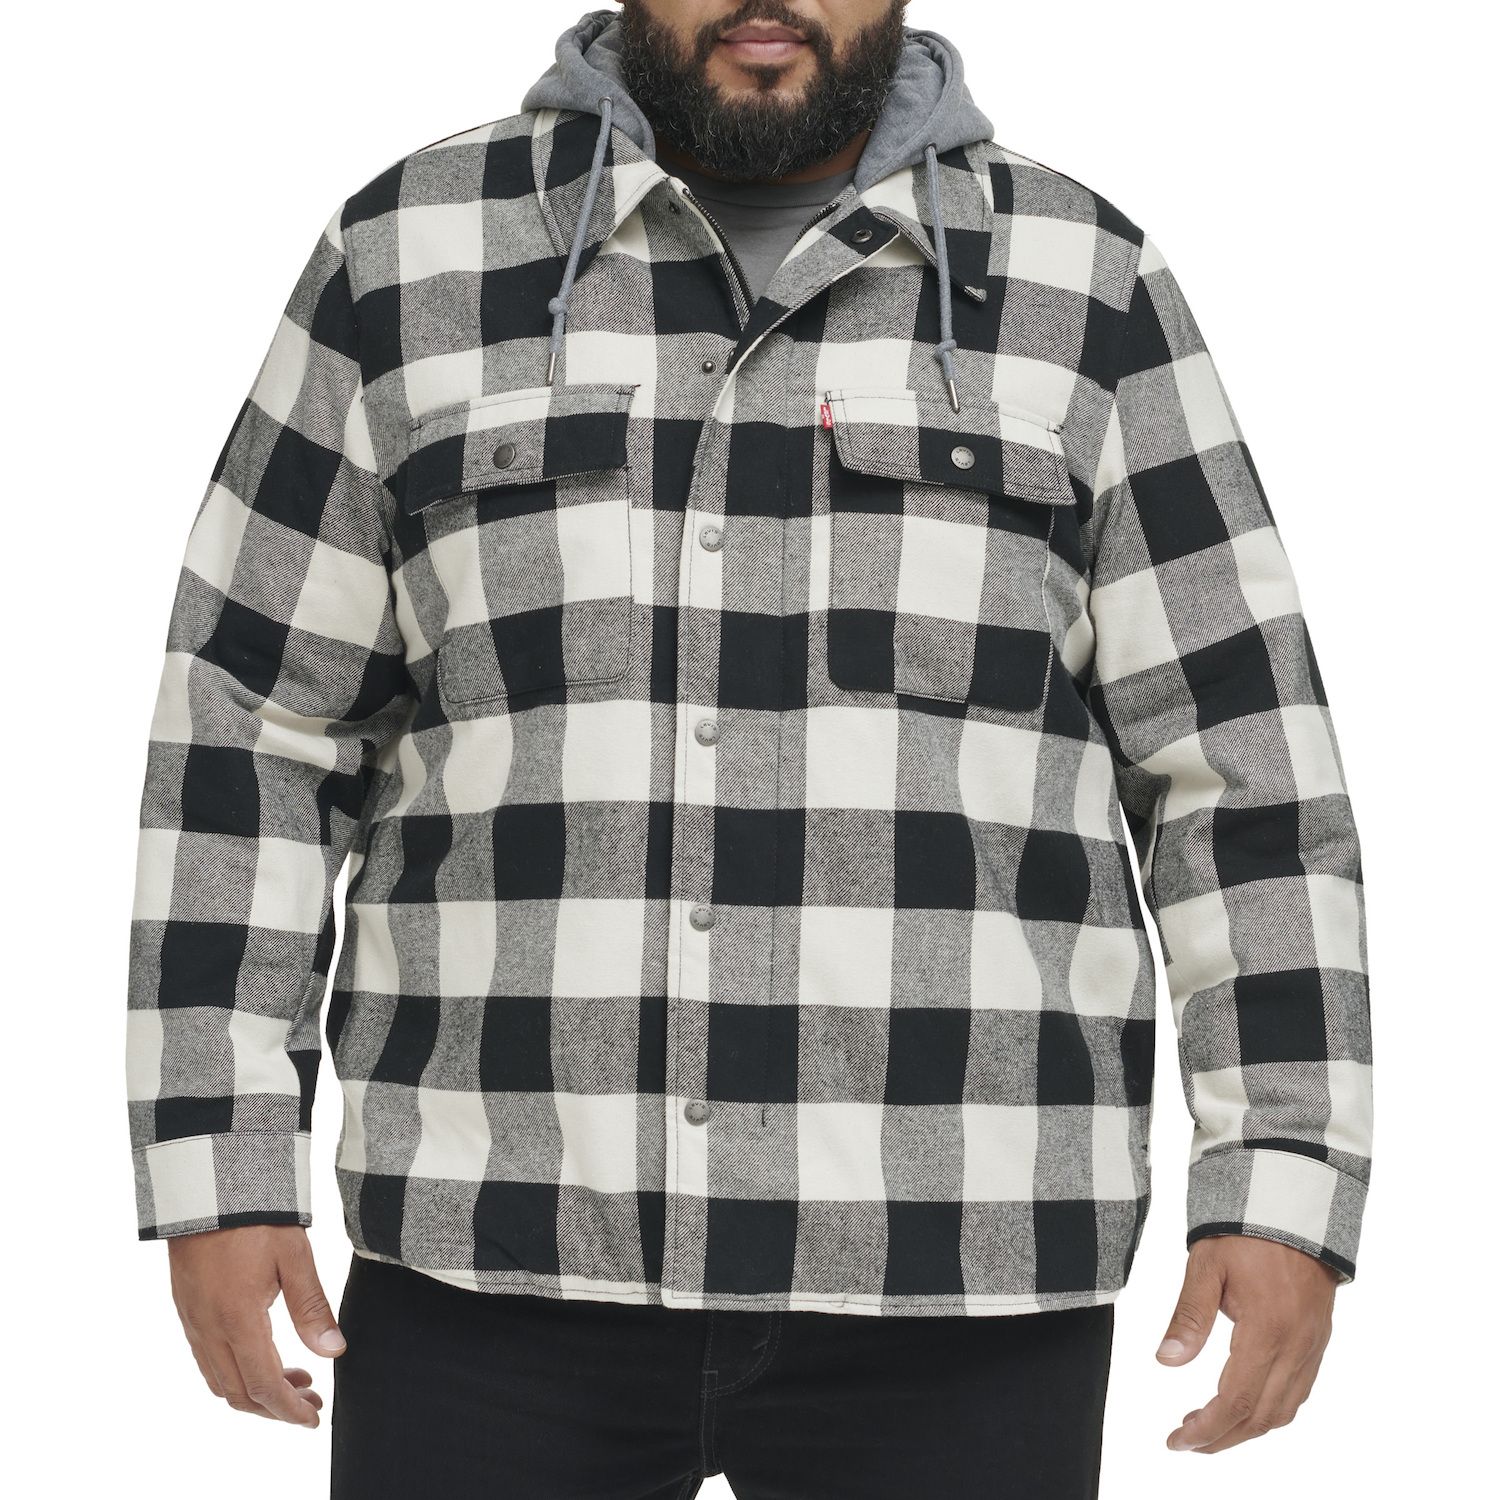 Image for Levi's Big & Tall Plaid Sherpa-Lined Hooded Shirt Jacket at Kohl's.